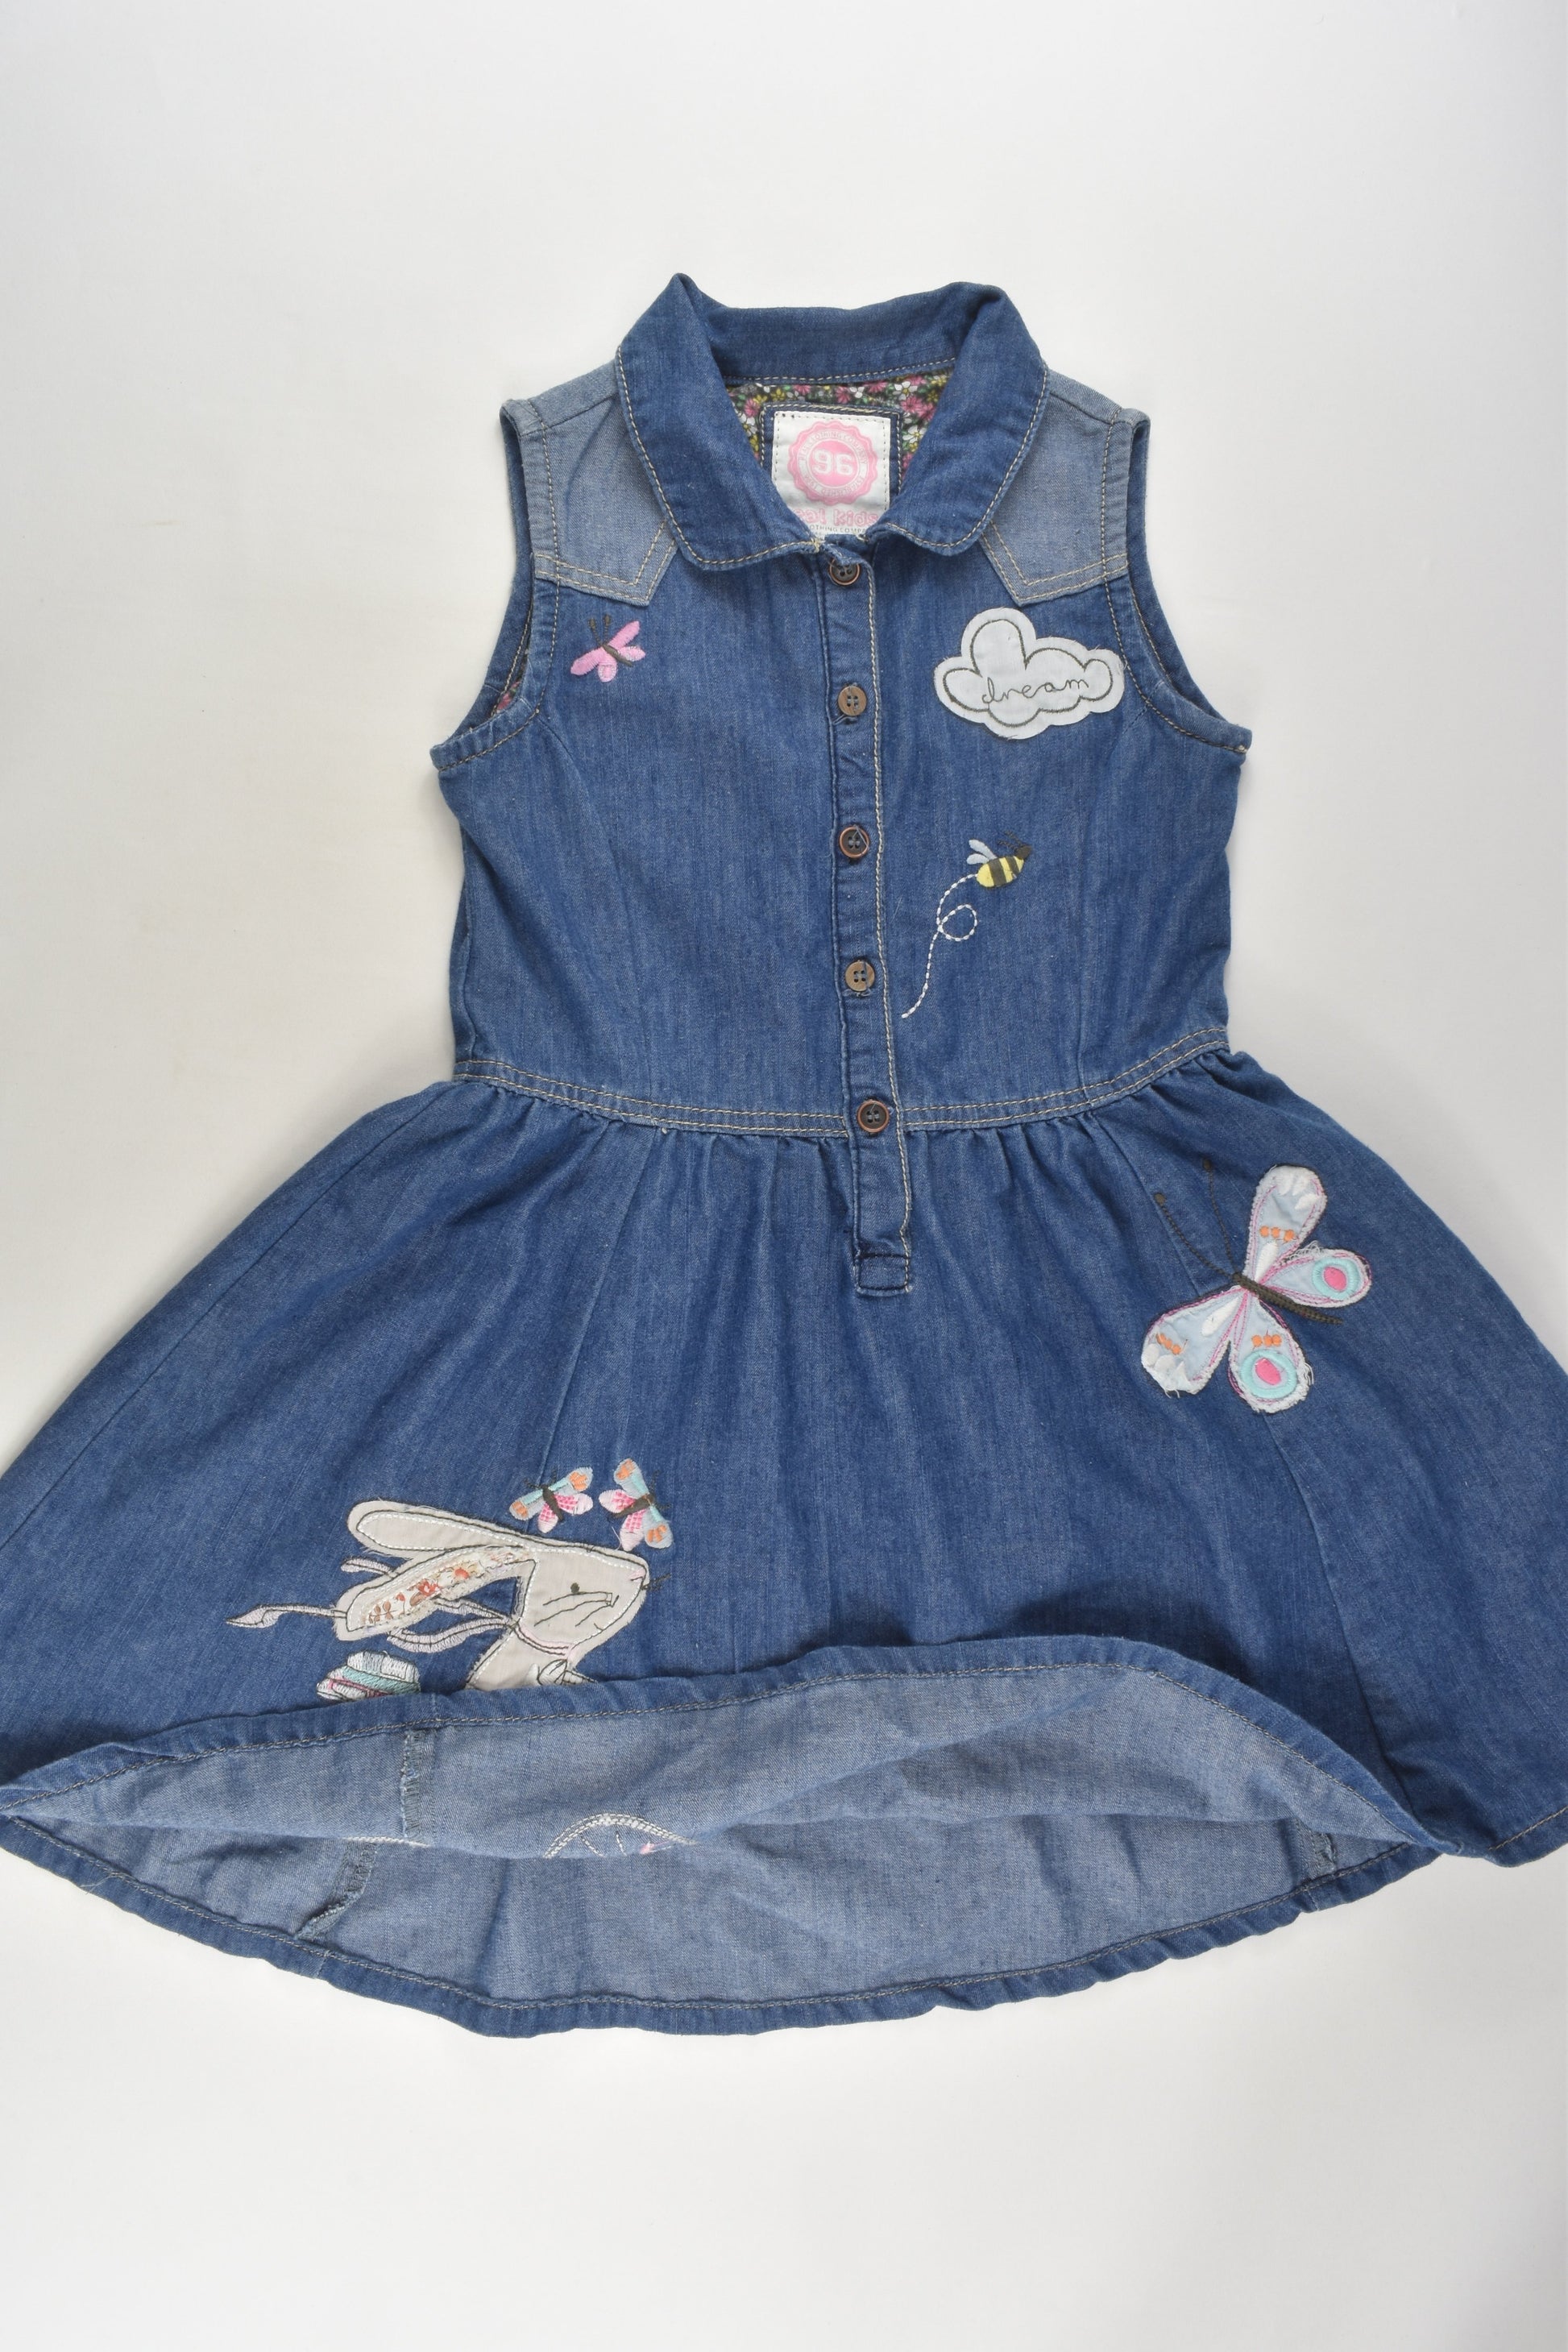 Real Kids Size 7-8 Butterflies and more Denim Dress